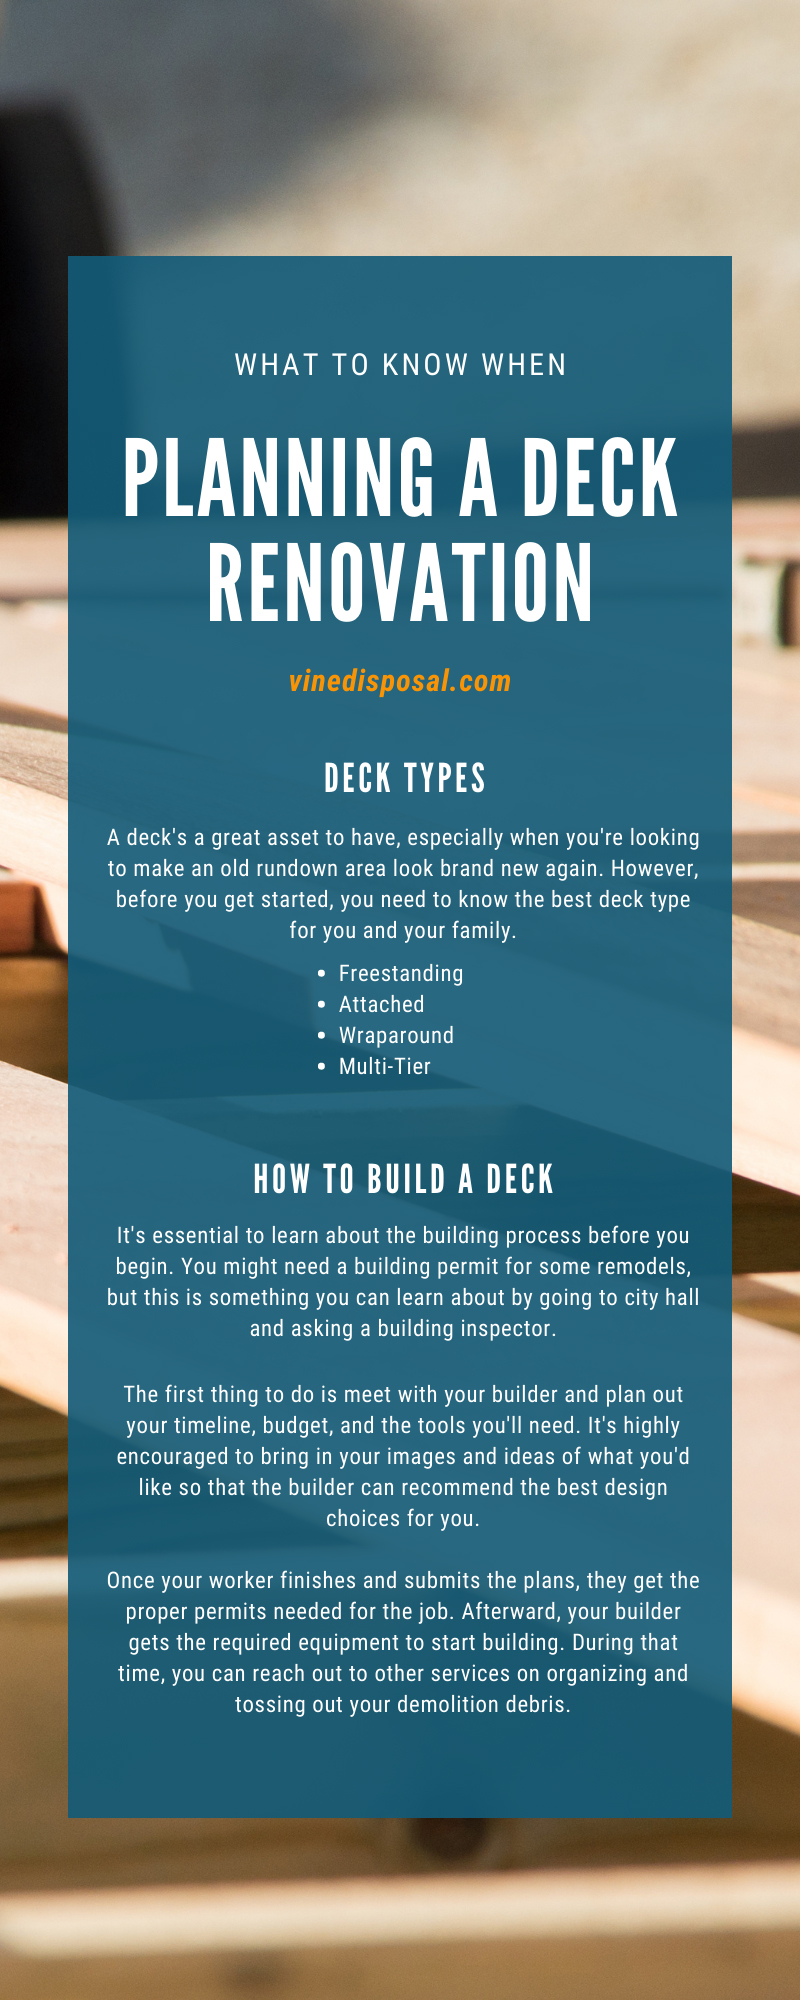 What To Know When Planning a Deck Renovation